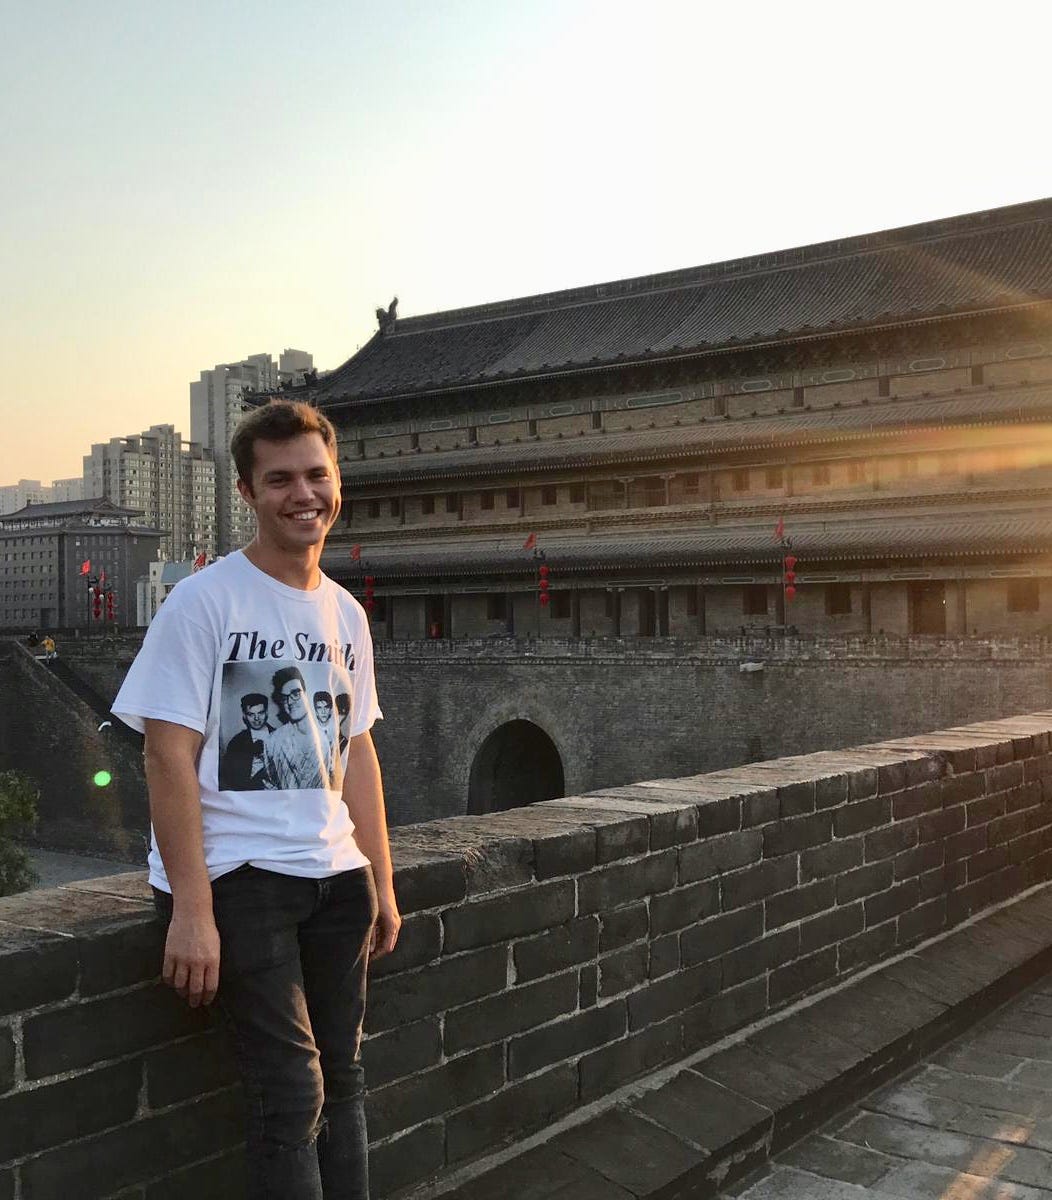 Clément on a layover in Xian, China